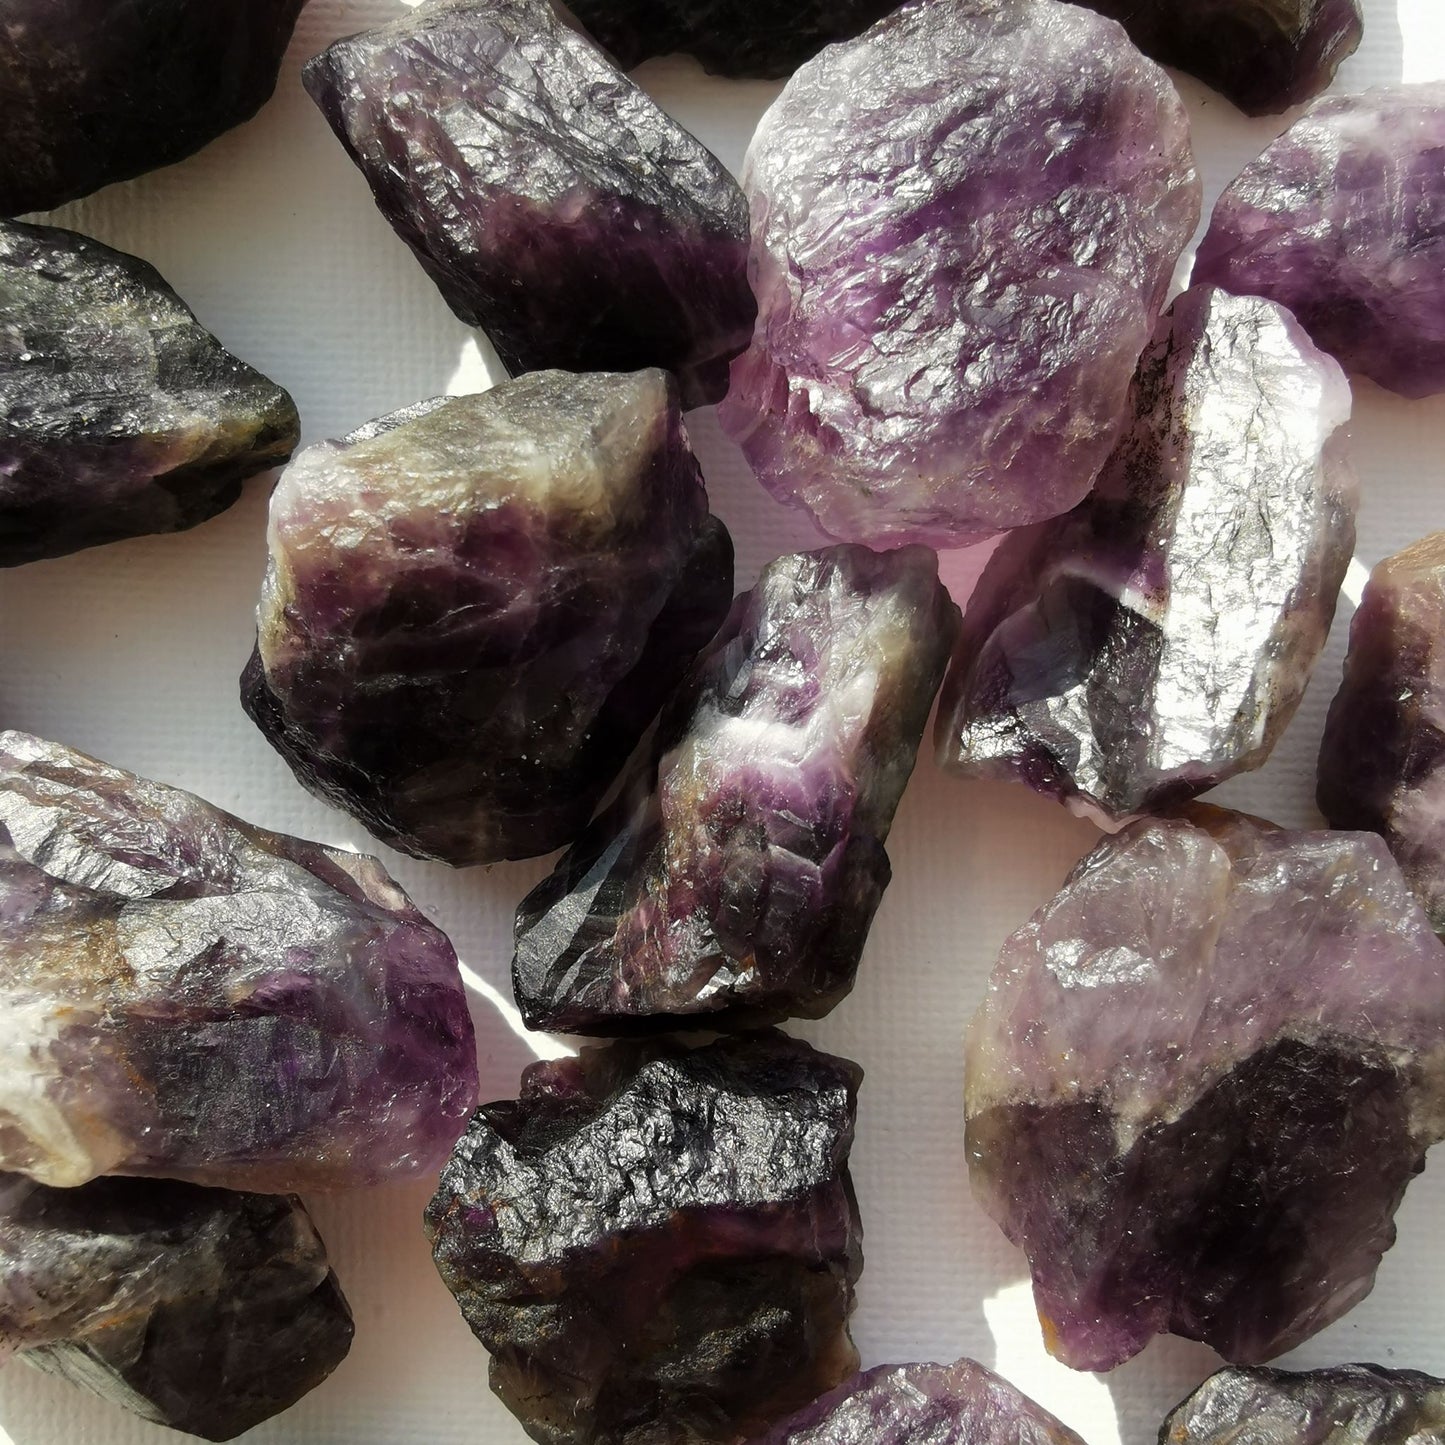 Dumi's Crystals | Rough Amethyst Crystals (Peace & Wisdom) | A collection of Rough Amethyst Crystals, each a reminder of the untamed spirit within. Rough Amethyst fosters tranquility, reduces stress & enhances spiritual awareness. Scatter them in your home or workspace to create a space overflowing with protective energy and a sense of inner wisdom.